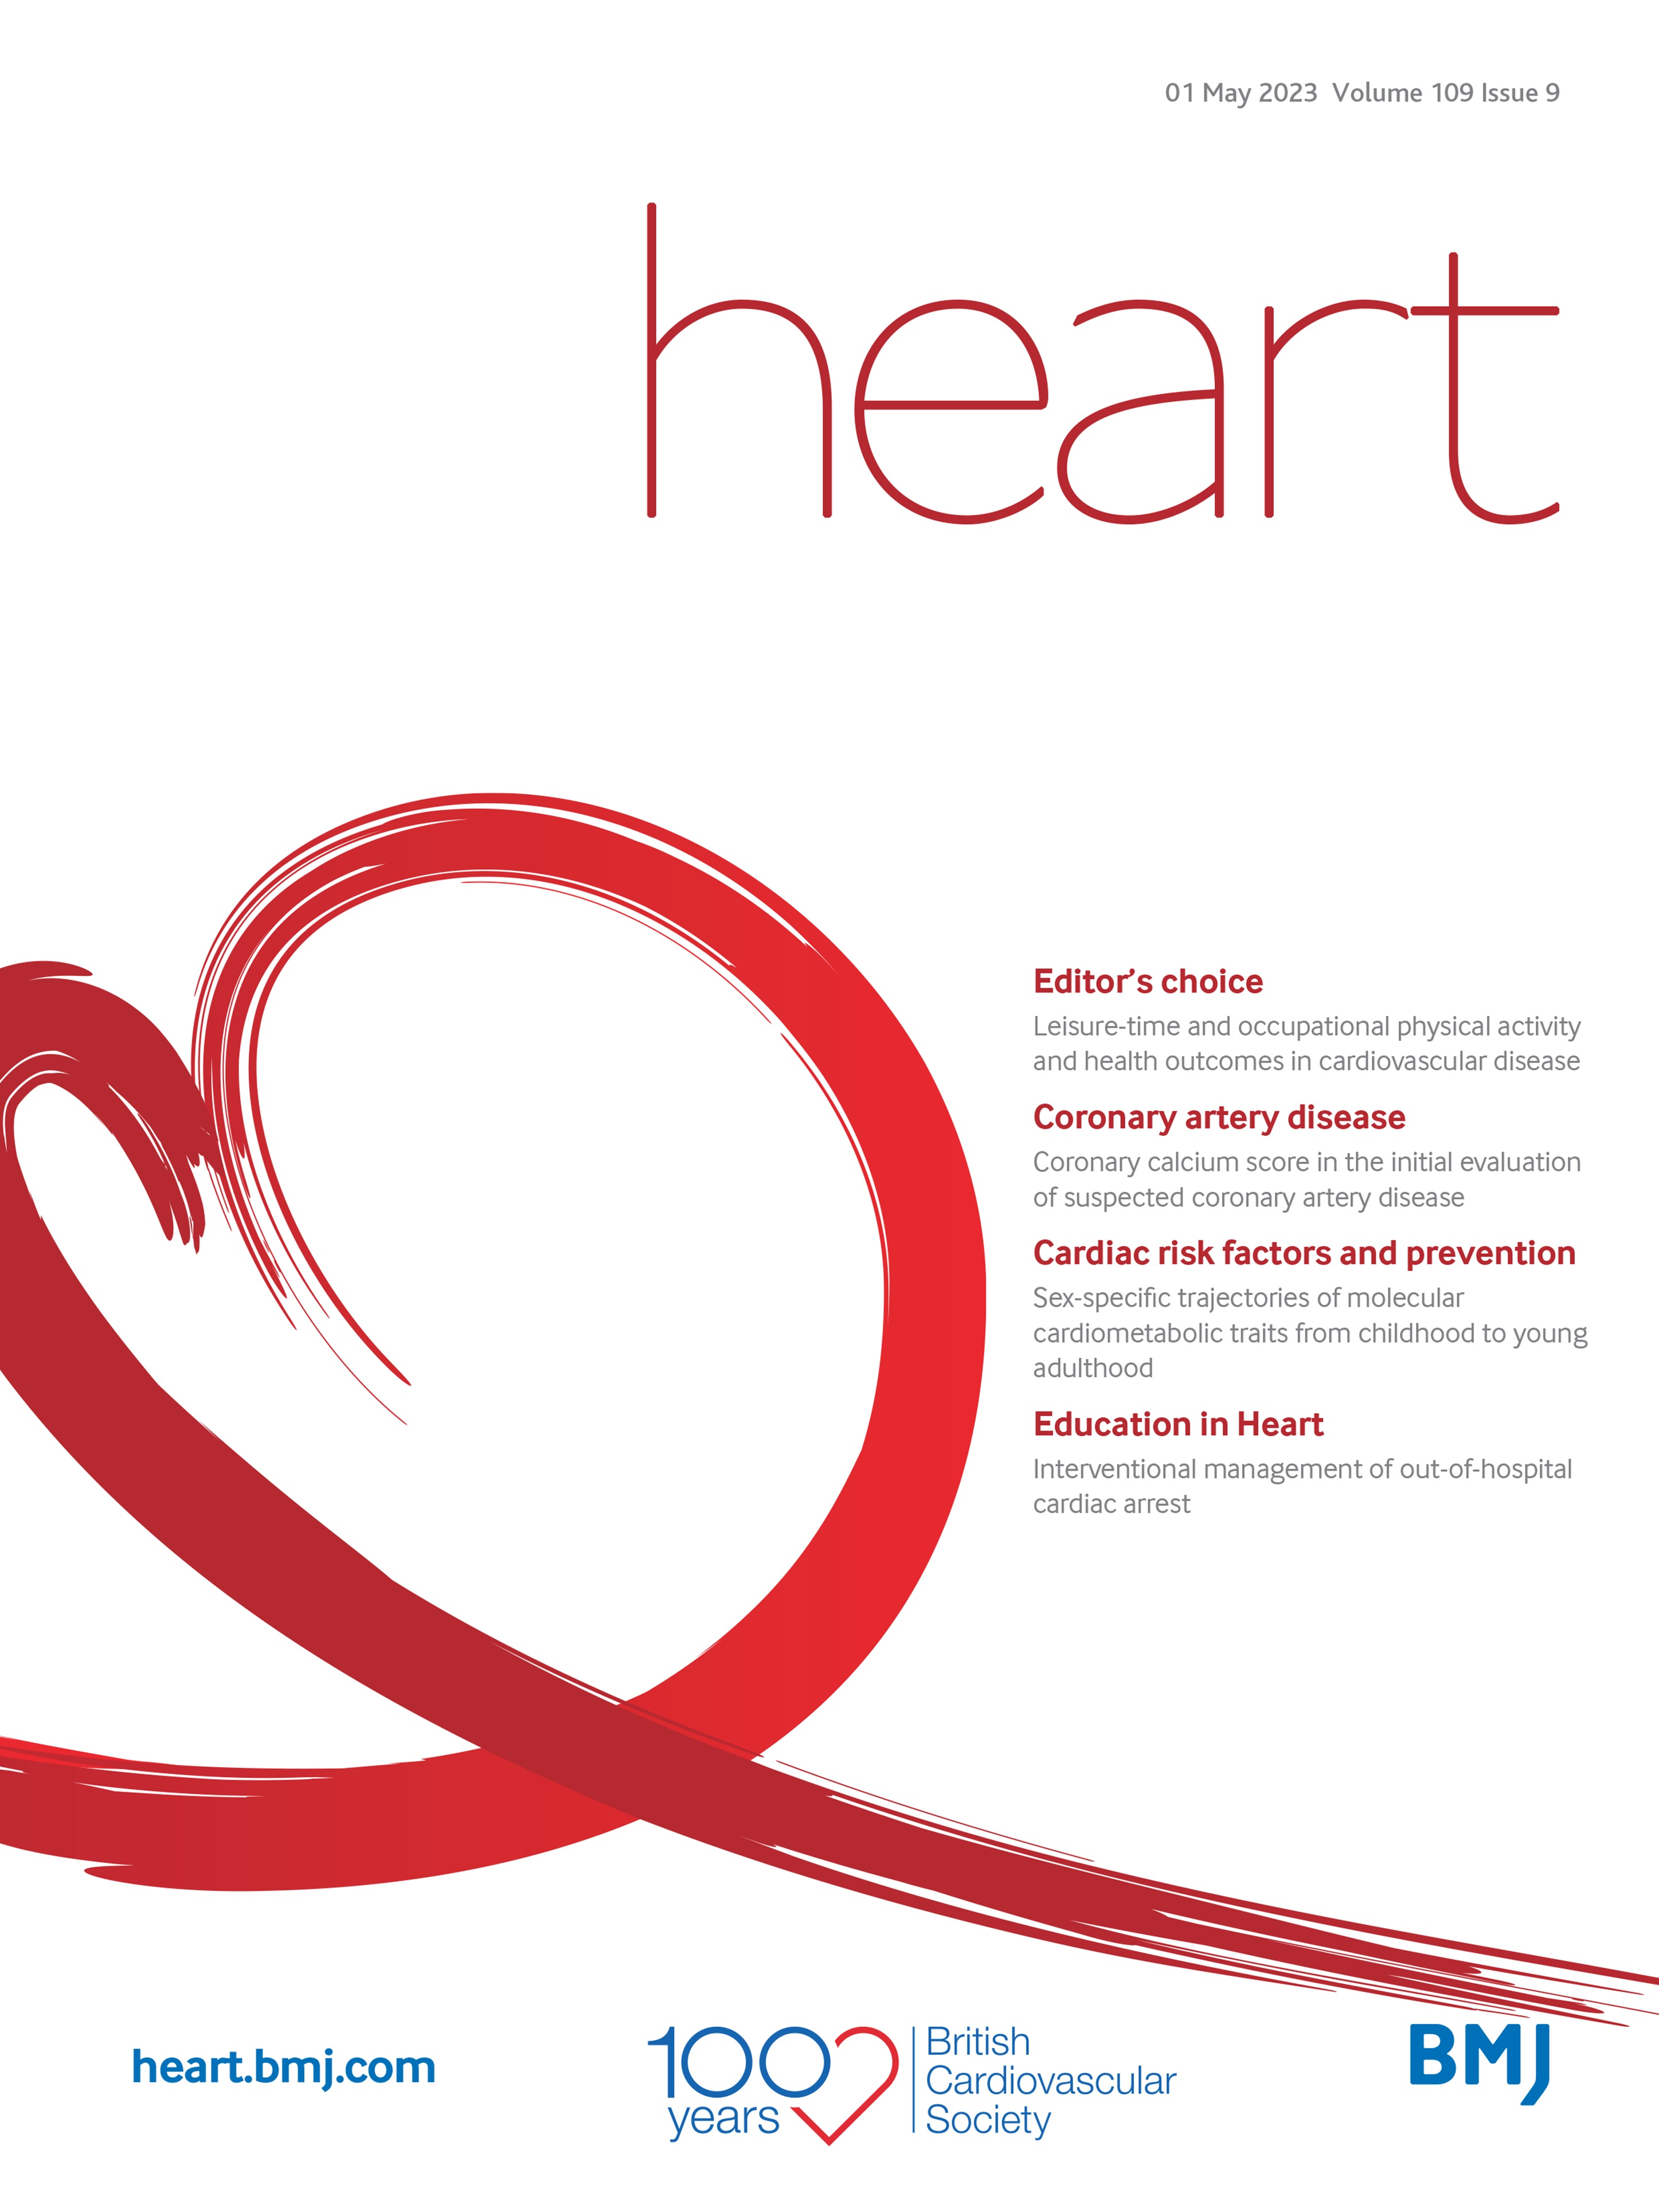 Heartbeat: cardiovascular risk is reduced by leisure-time, but not occupational, physical activity